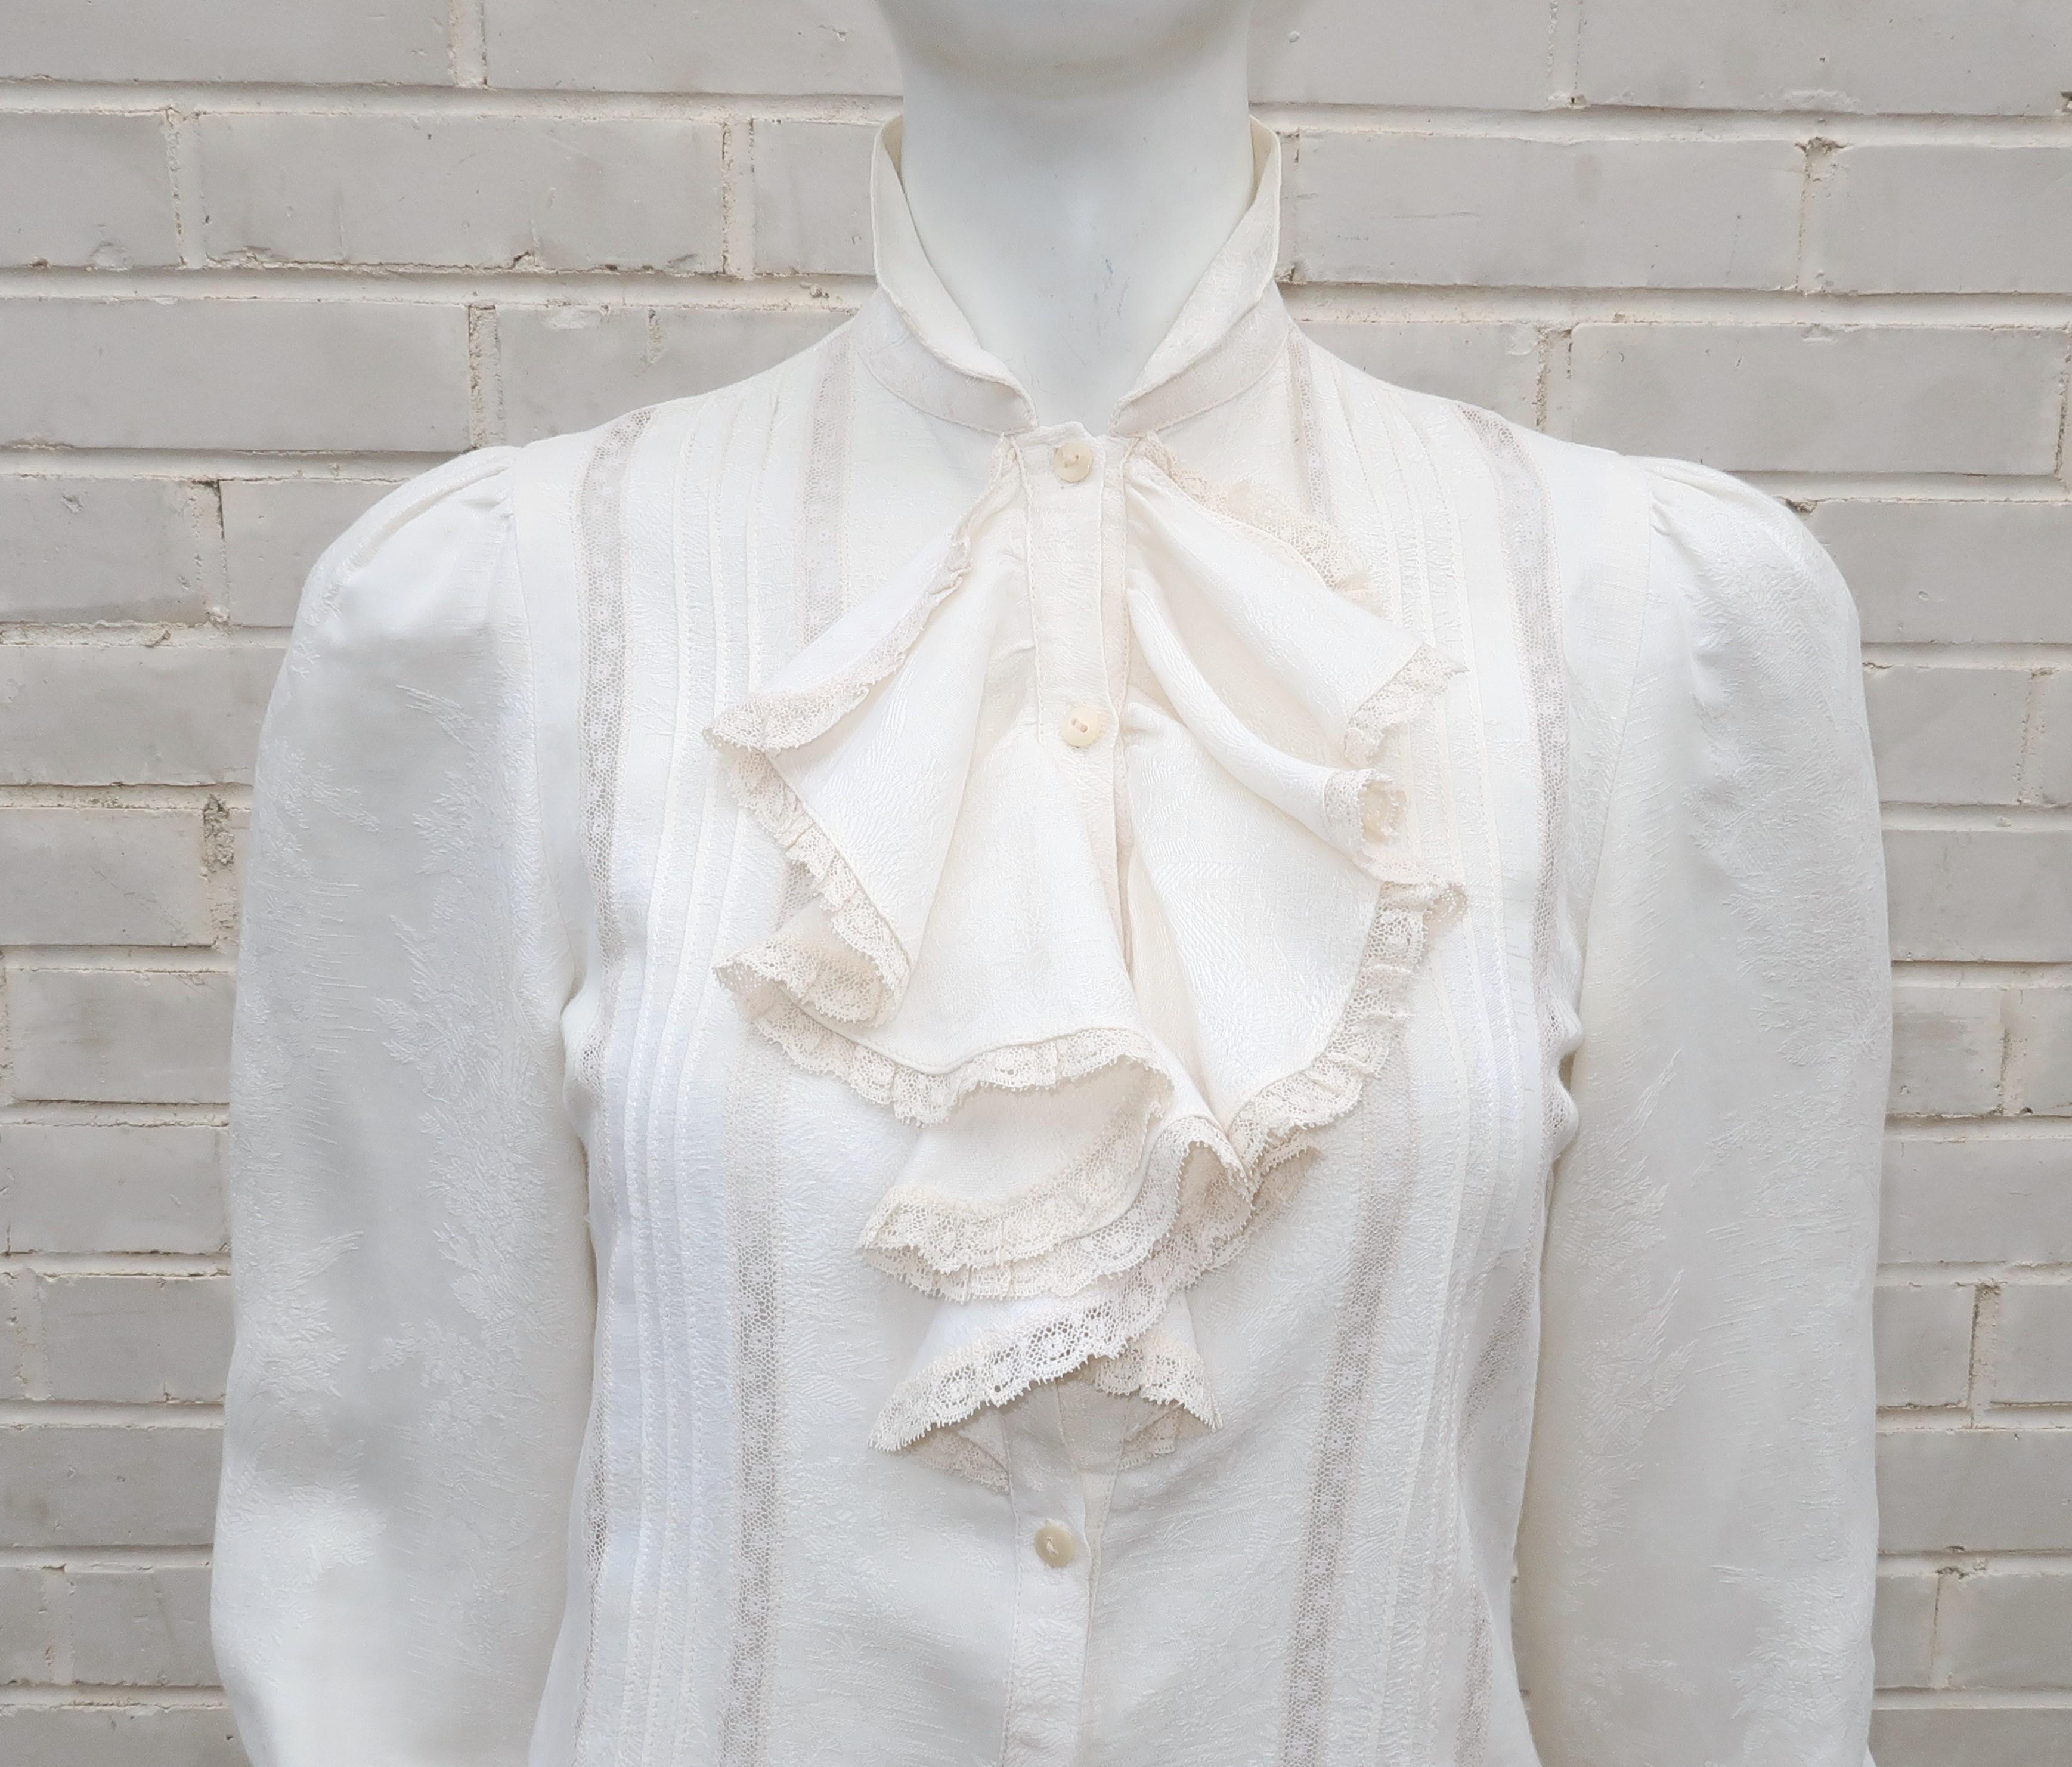 The vintage inspiration for this lovely Ralph Lauren blouse could be an Edwardian beauty in a John Singer Sargent portrait.  The romantic combination of a blended ivory white silk and cotton jacquard with lace inserts and a jabot style ruffle at the